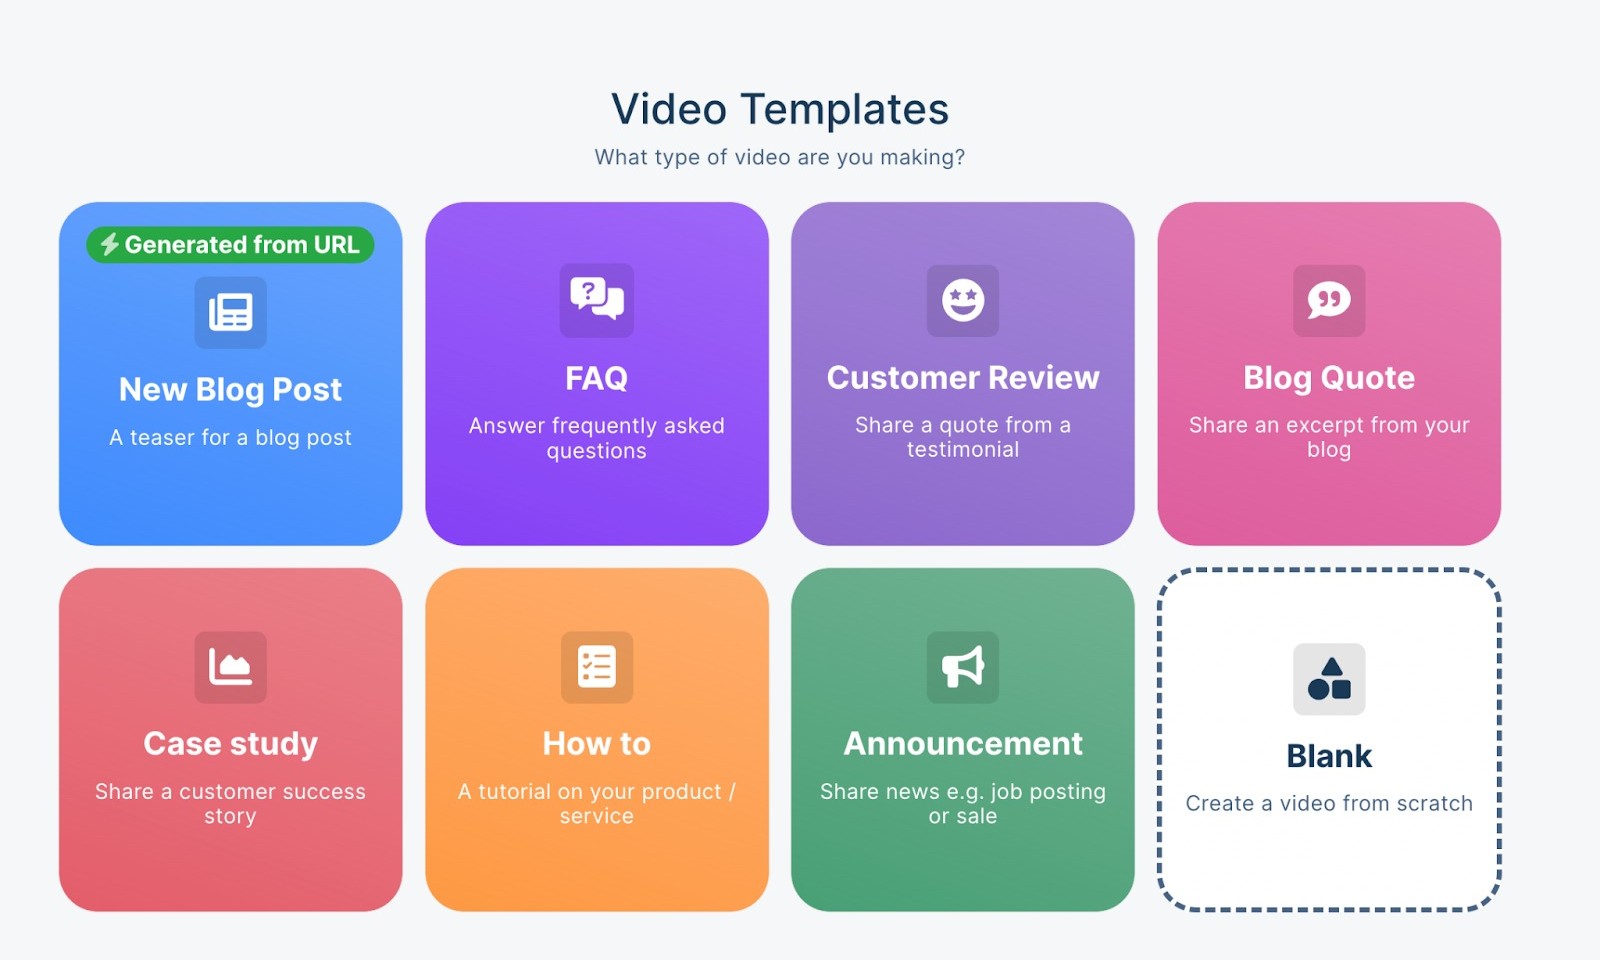 Video template options: new blog post, FAQ, customer review, blog quote, case study, how to, announcement, or blank.